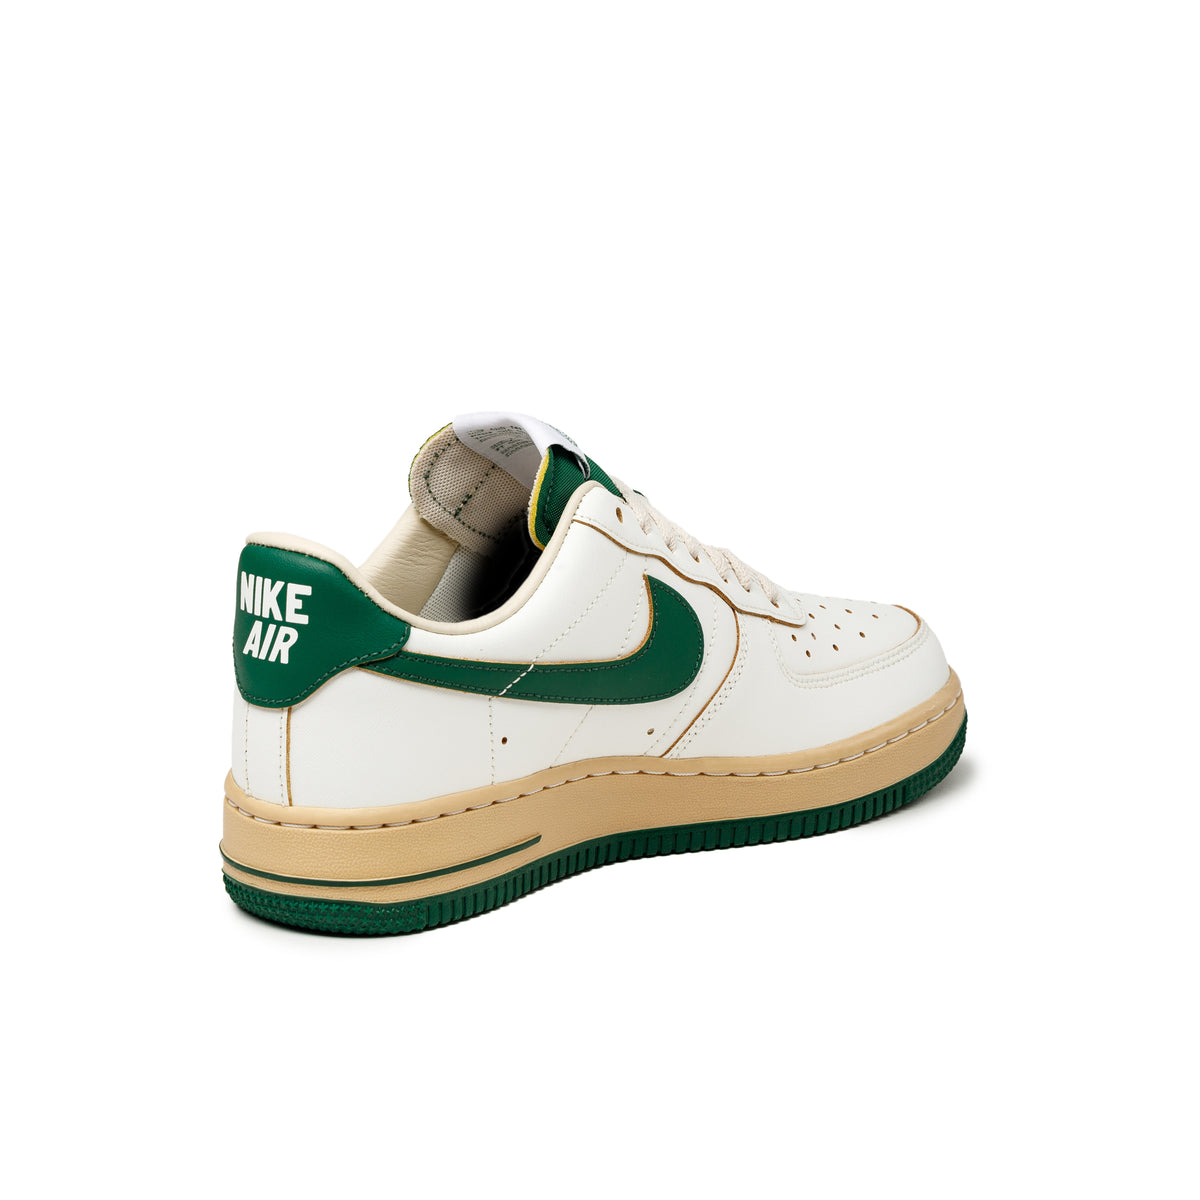 Nike Air Force 1 '07 LV8 Sneaker in Saile & Gorge Green